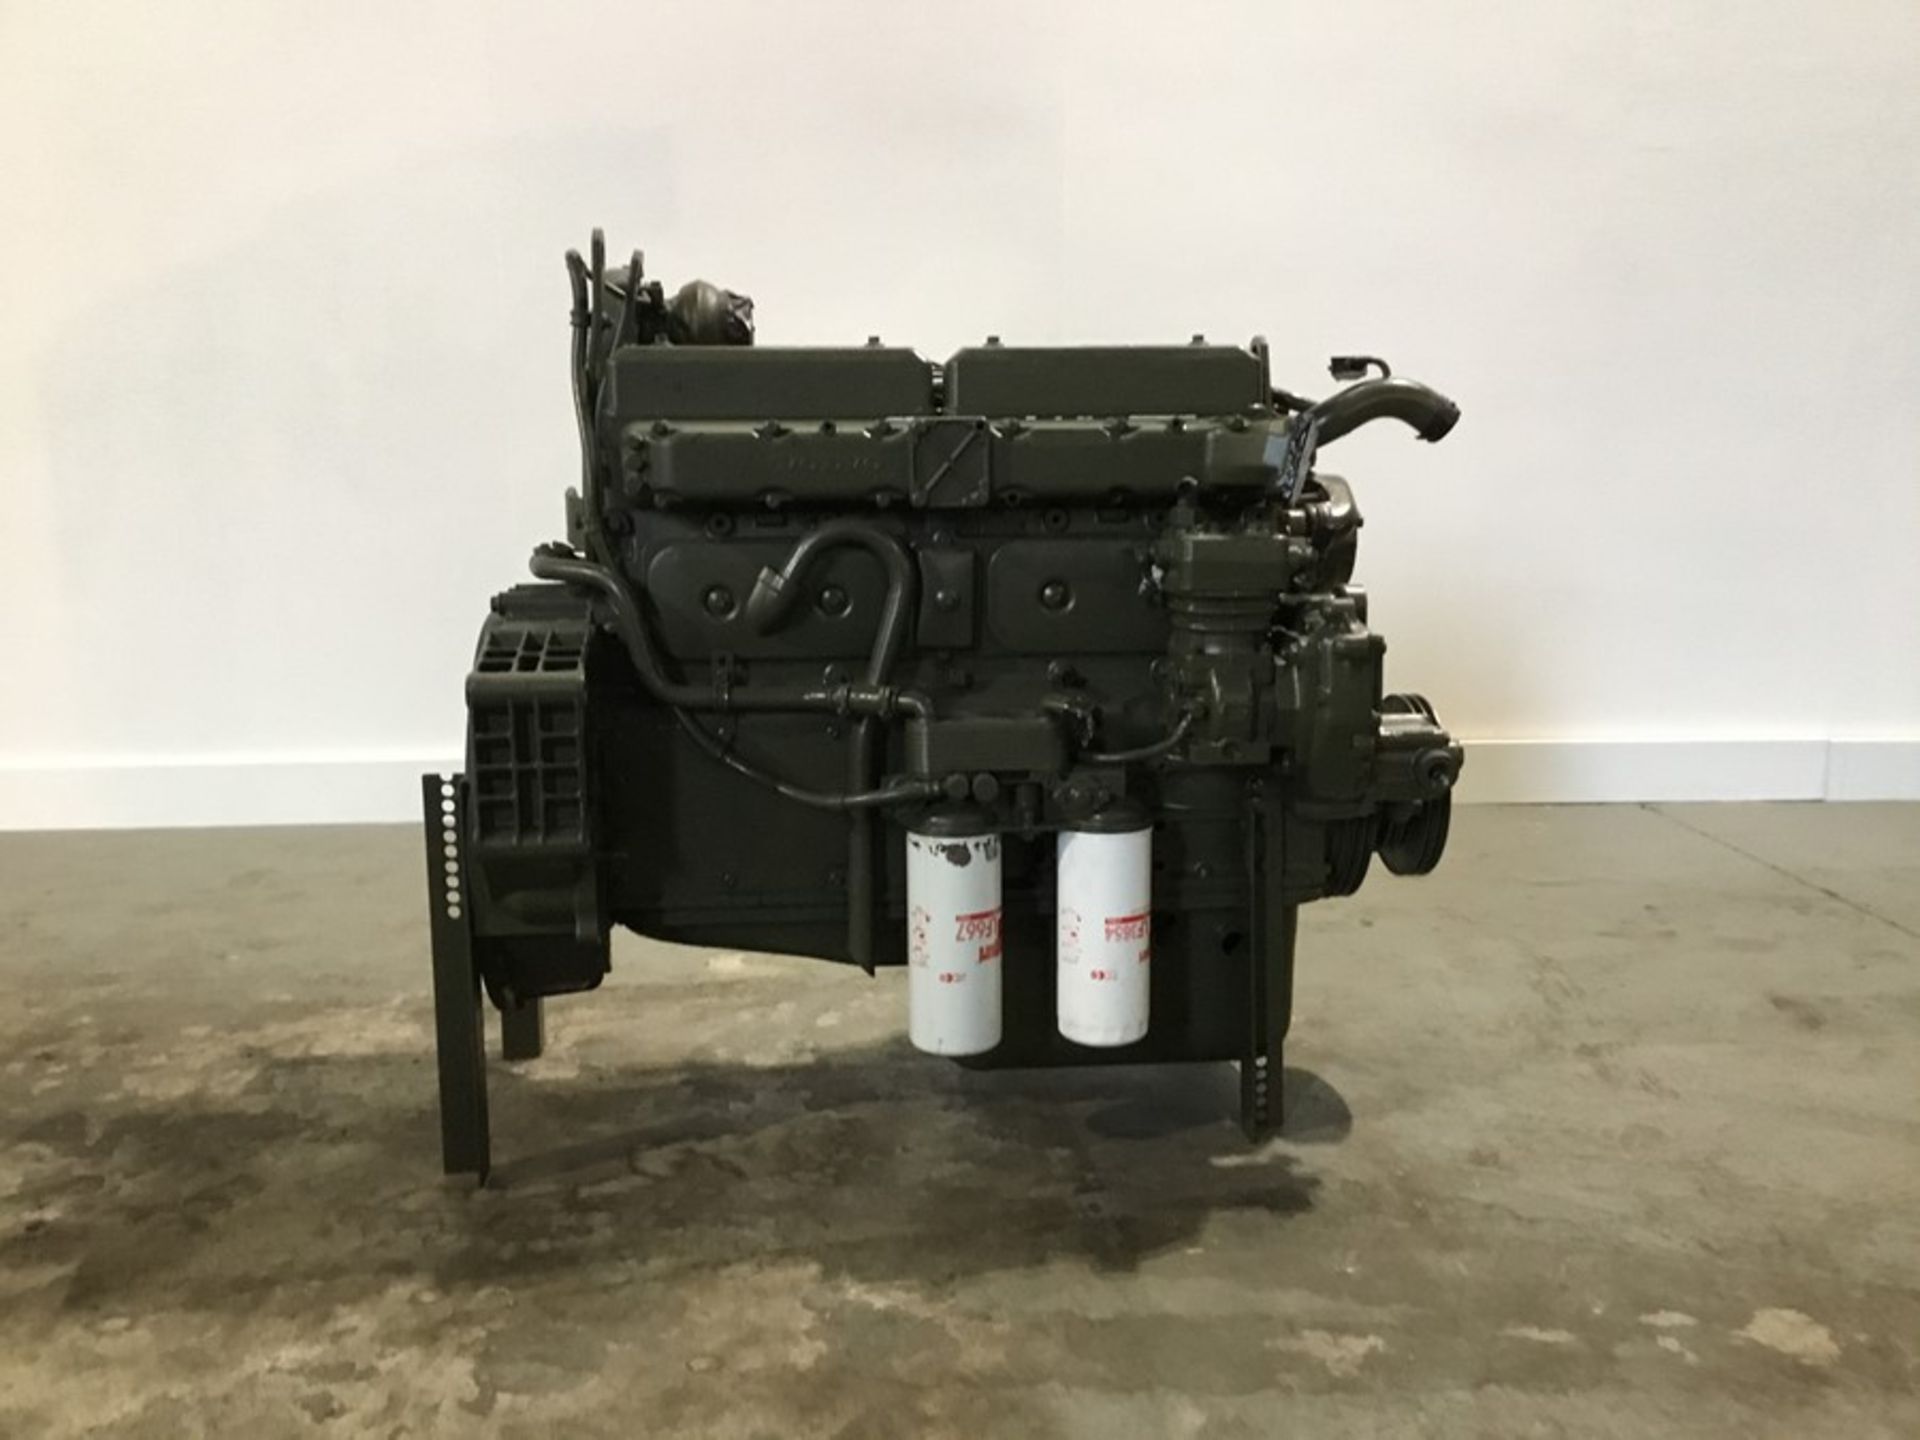 Volvo D6 Diesel Engine: Volvo D6 6Cyl Turbo low hours - Image 2 of 18